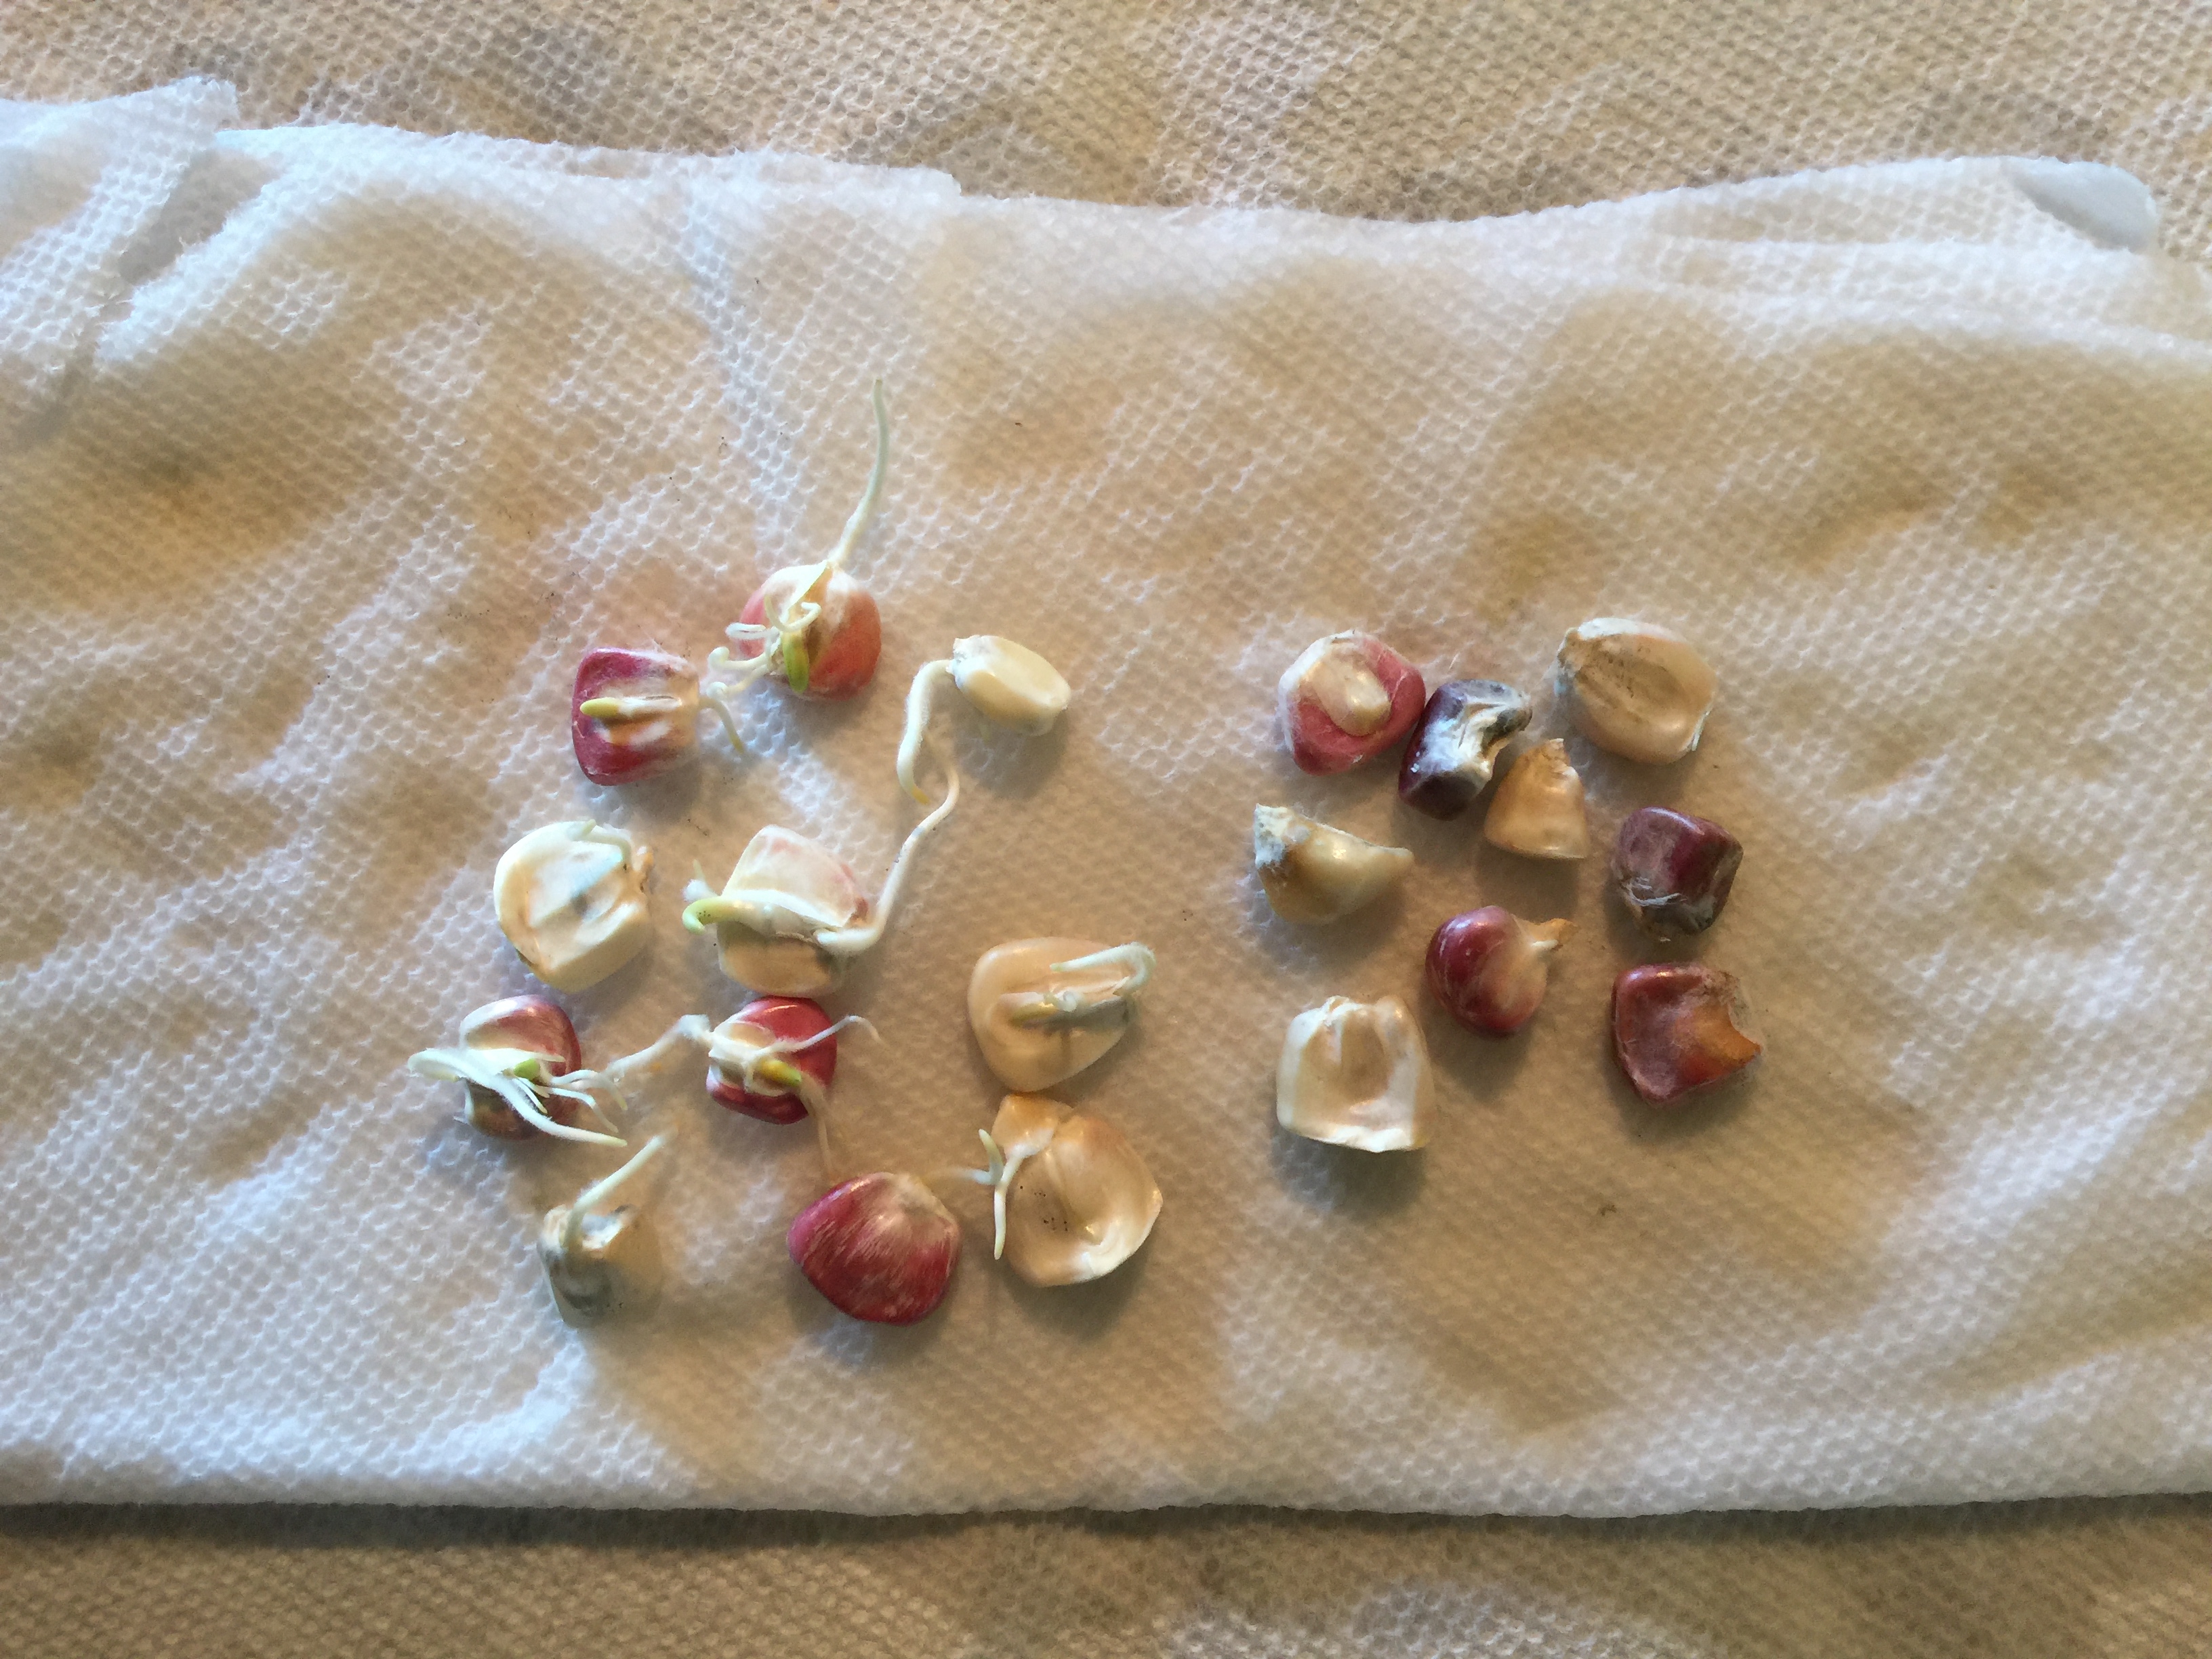 The simple germination test